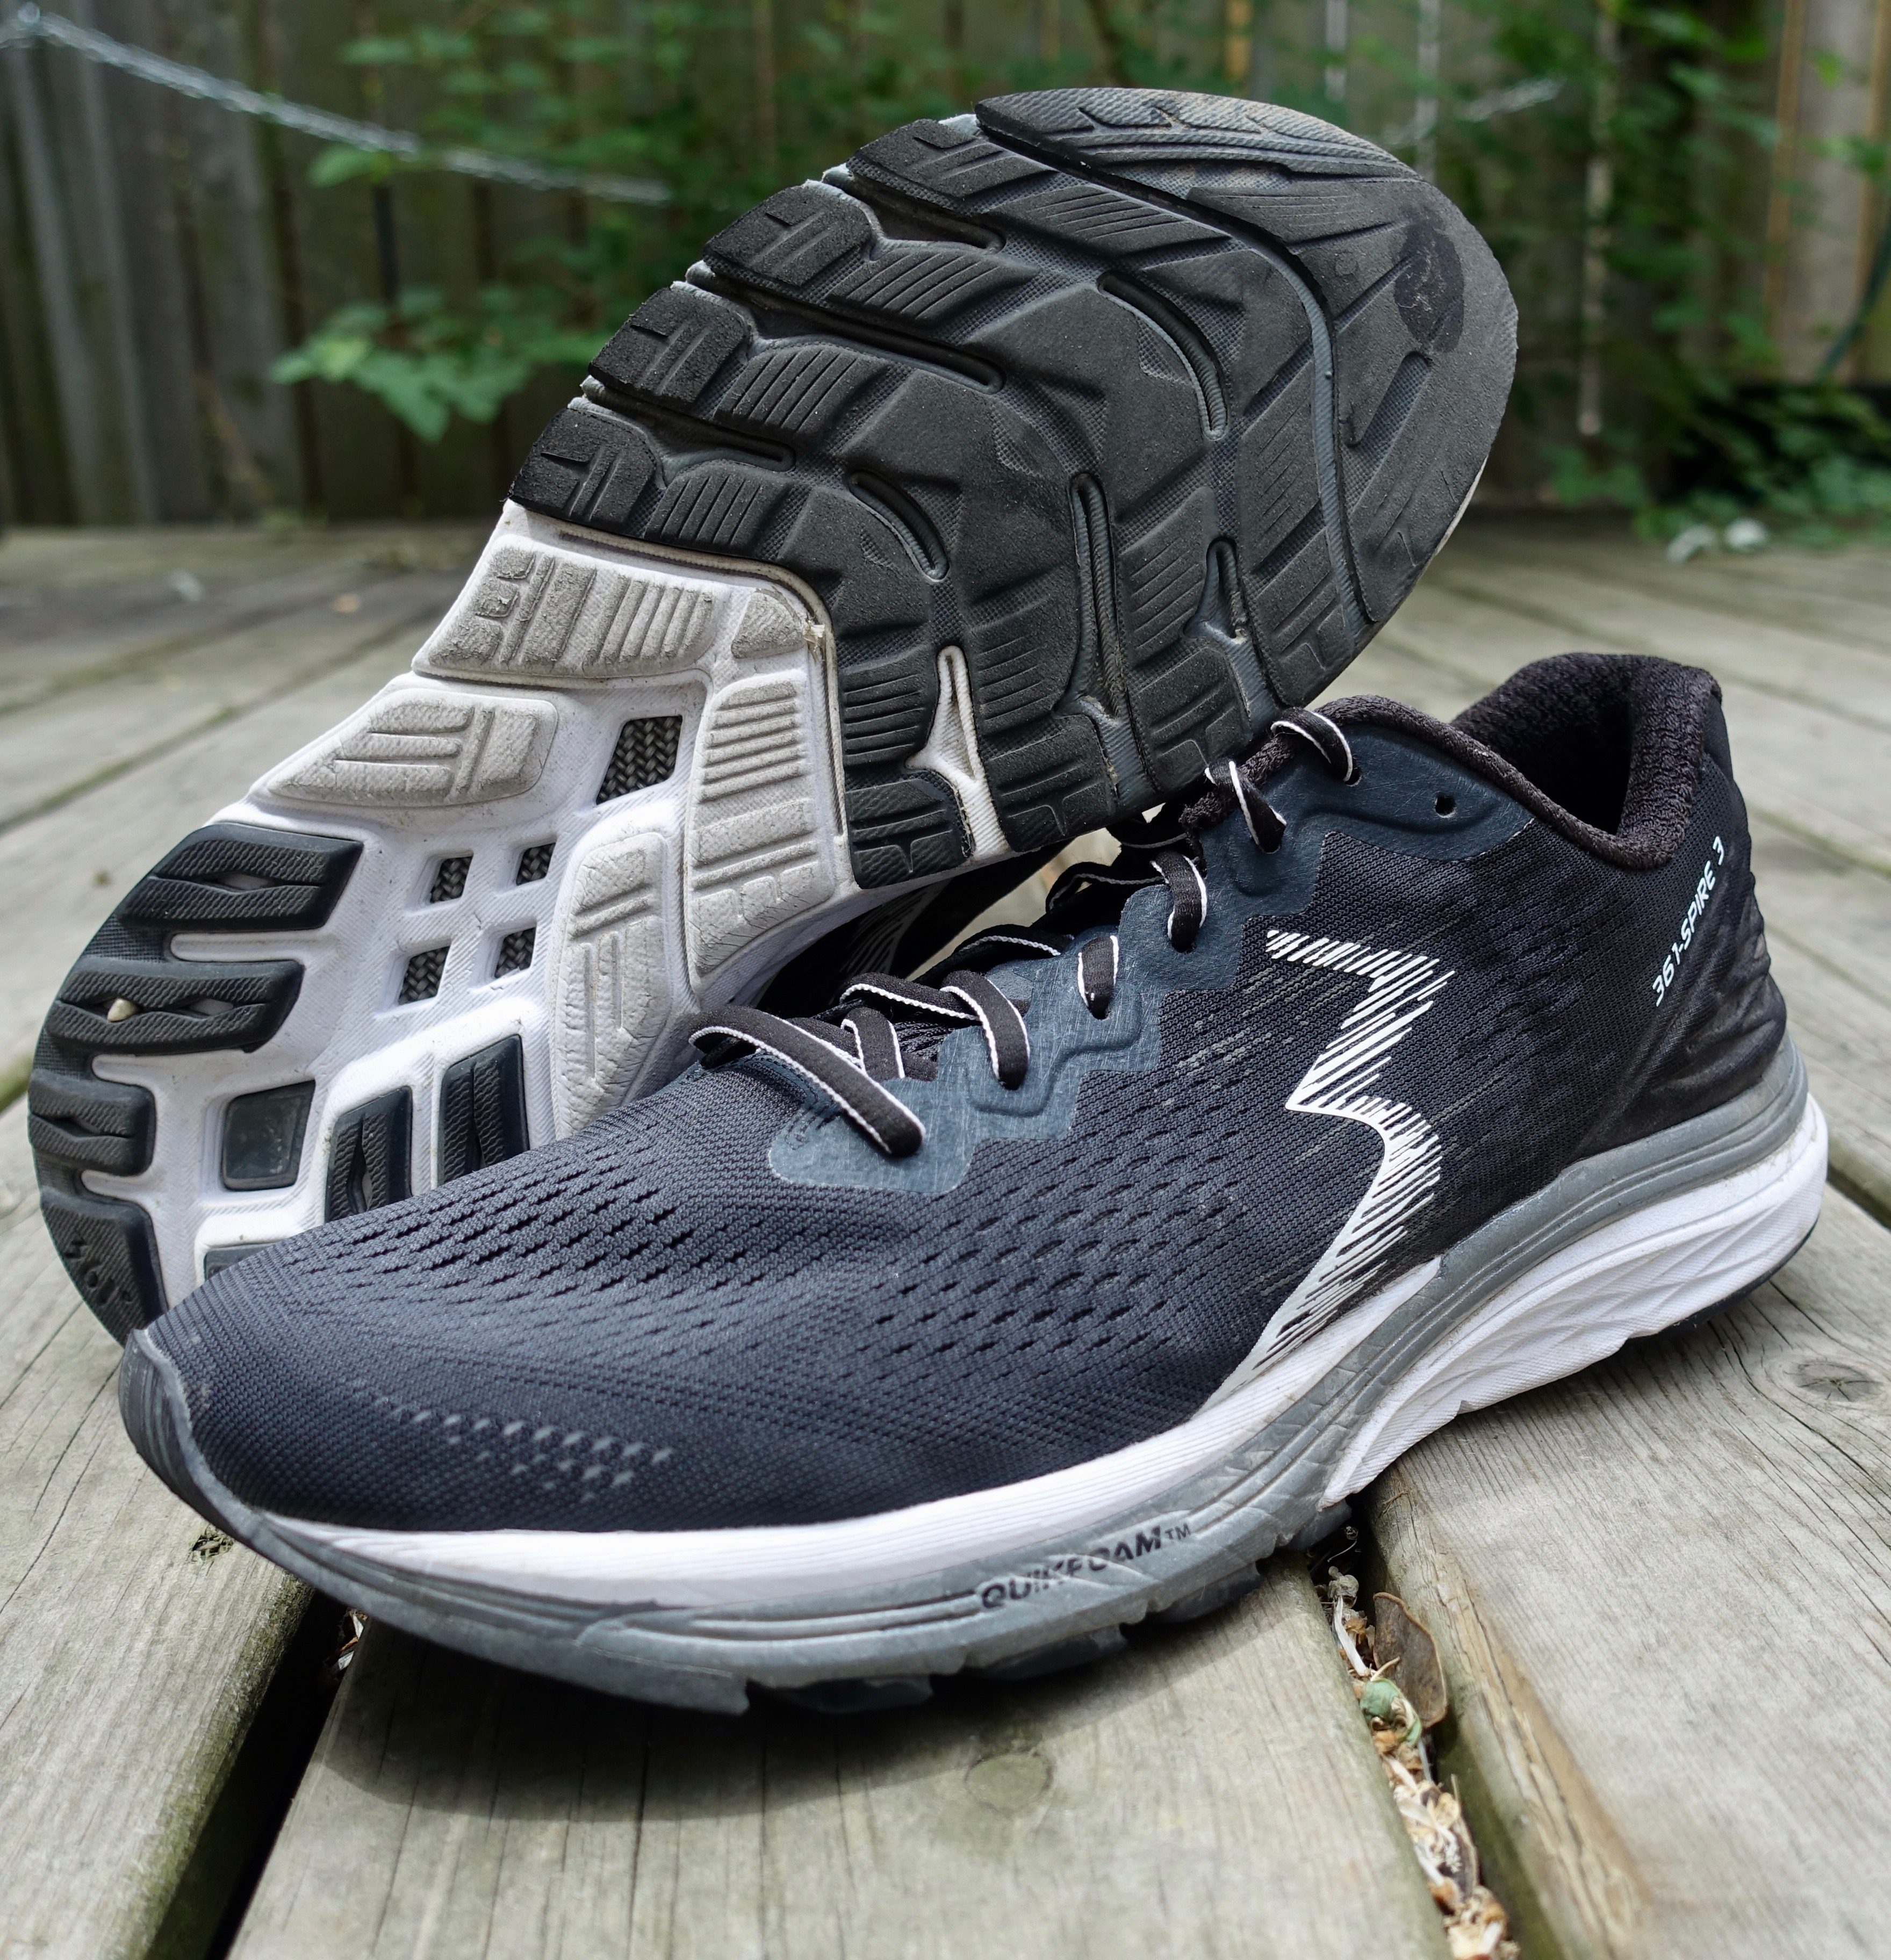 SHOE REVIEW: 361 Degrees Spire 3 